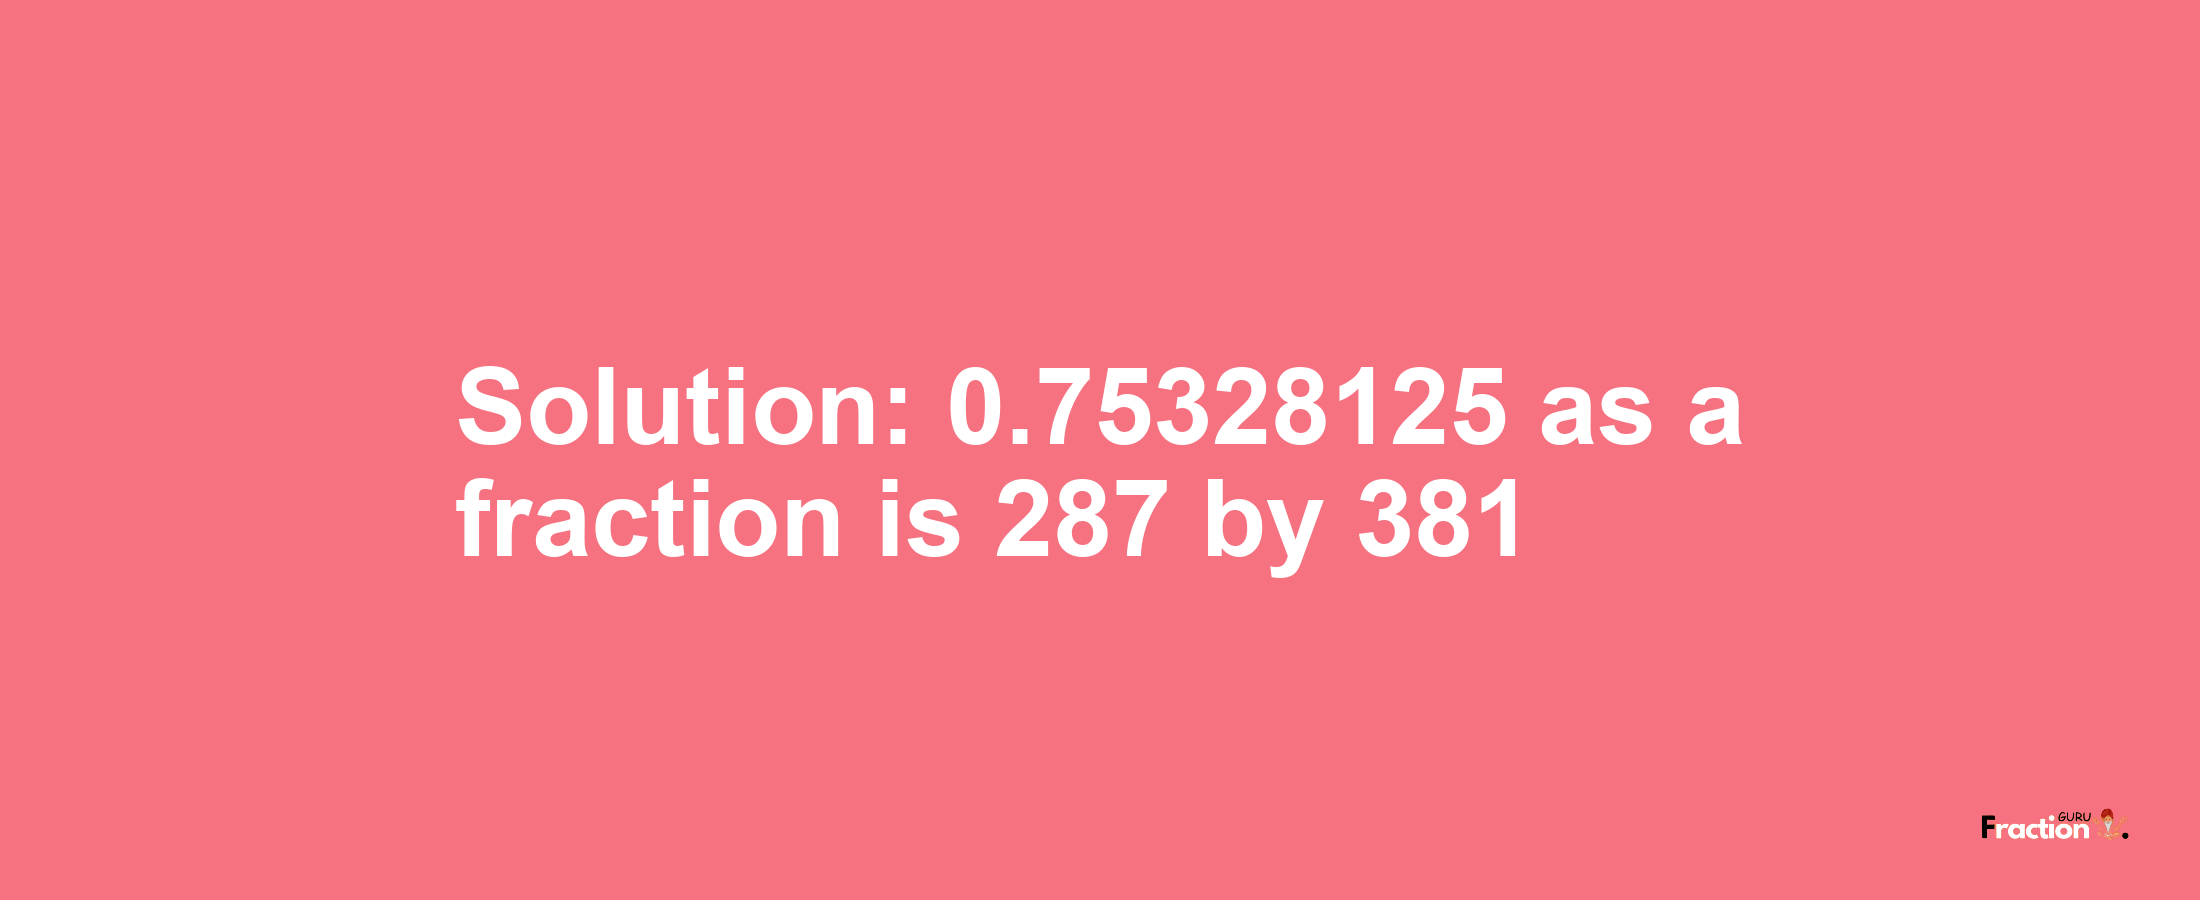 Solution:0.75328125 as a fraction is 287/381